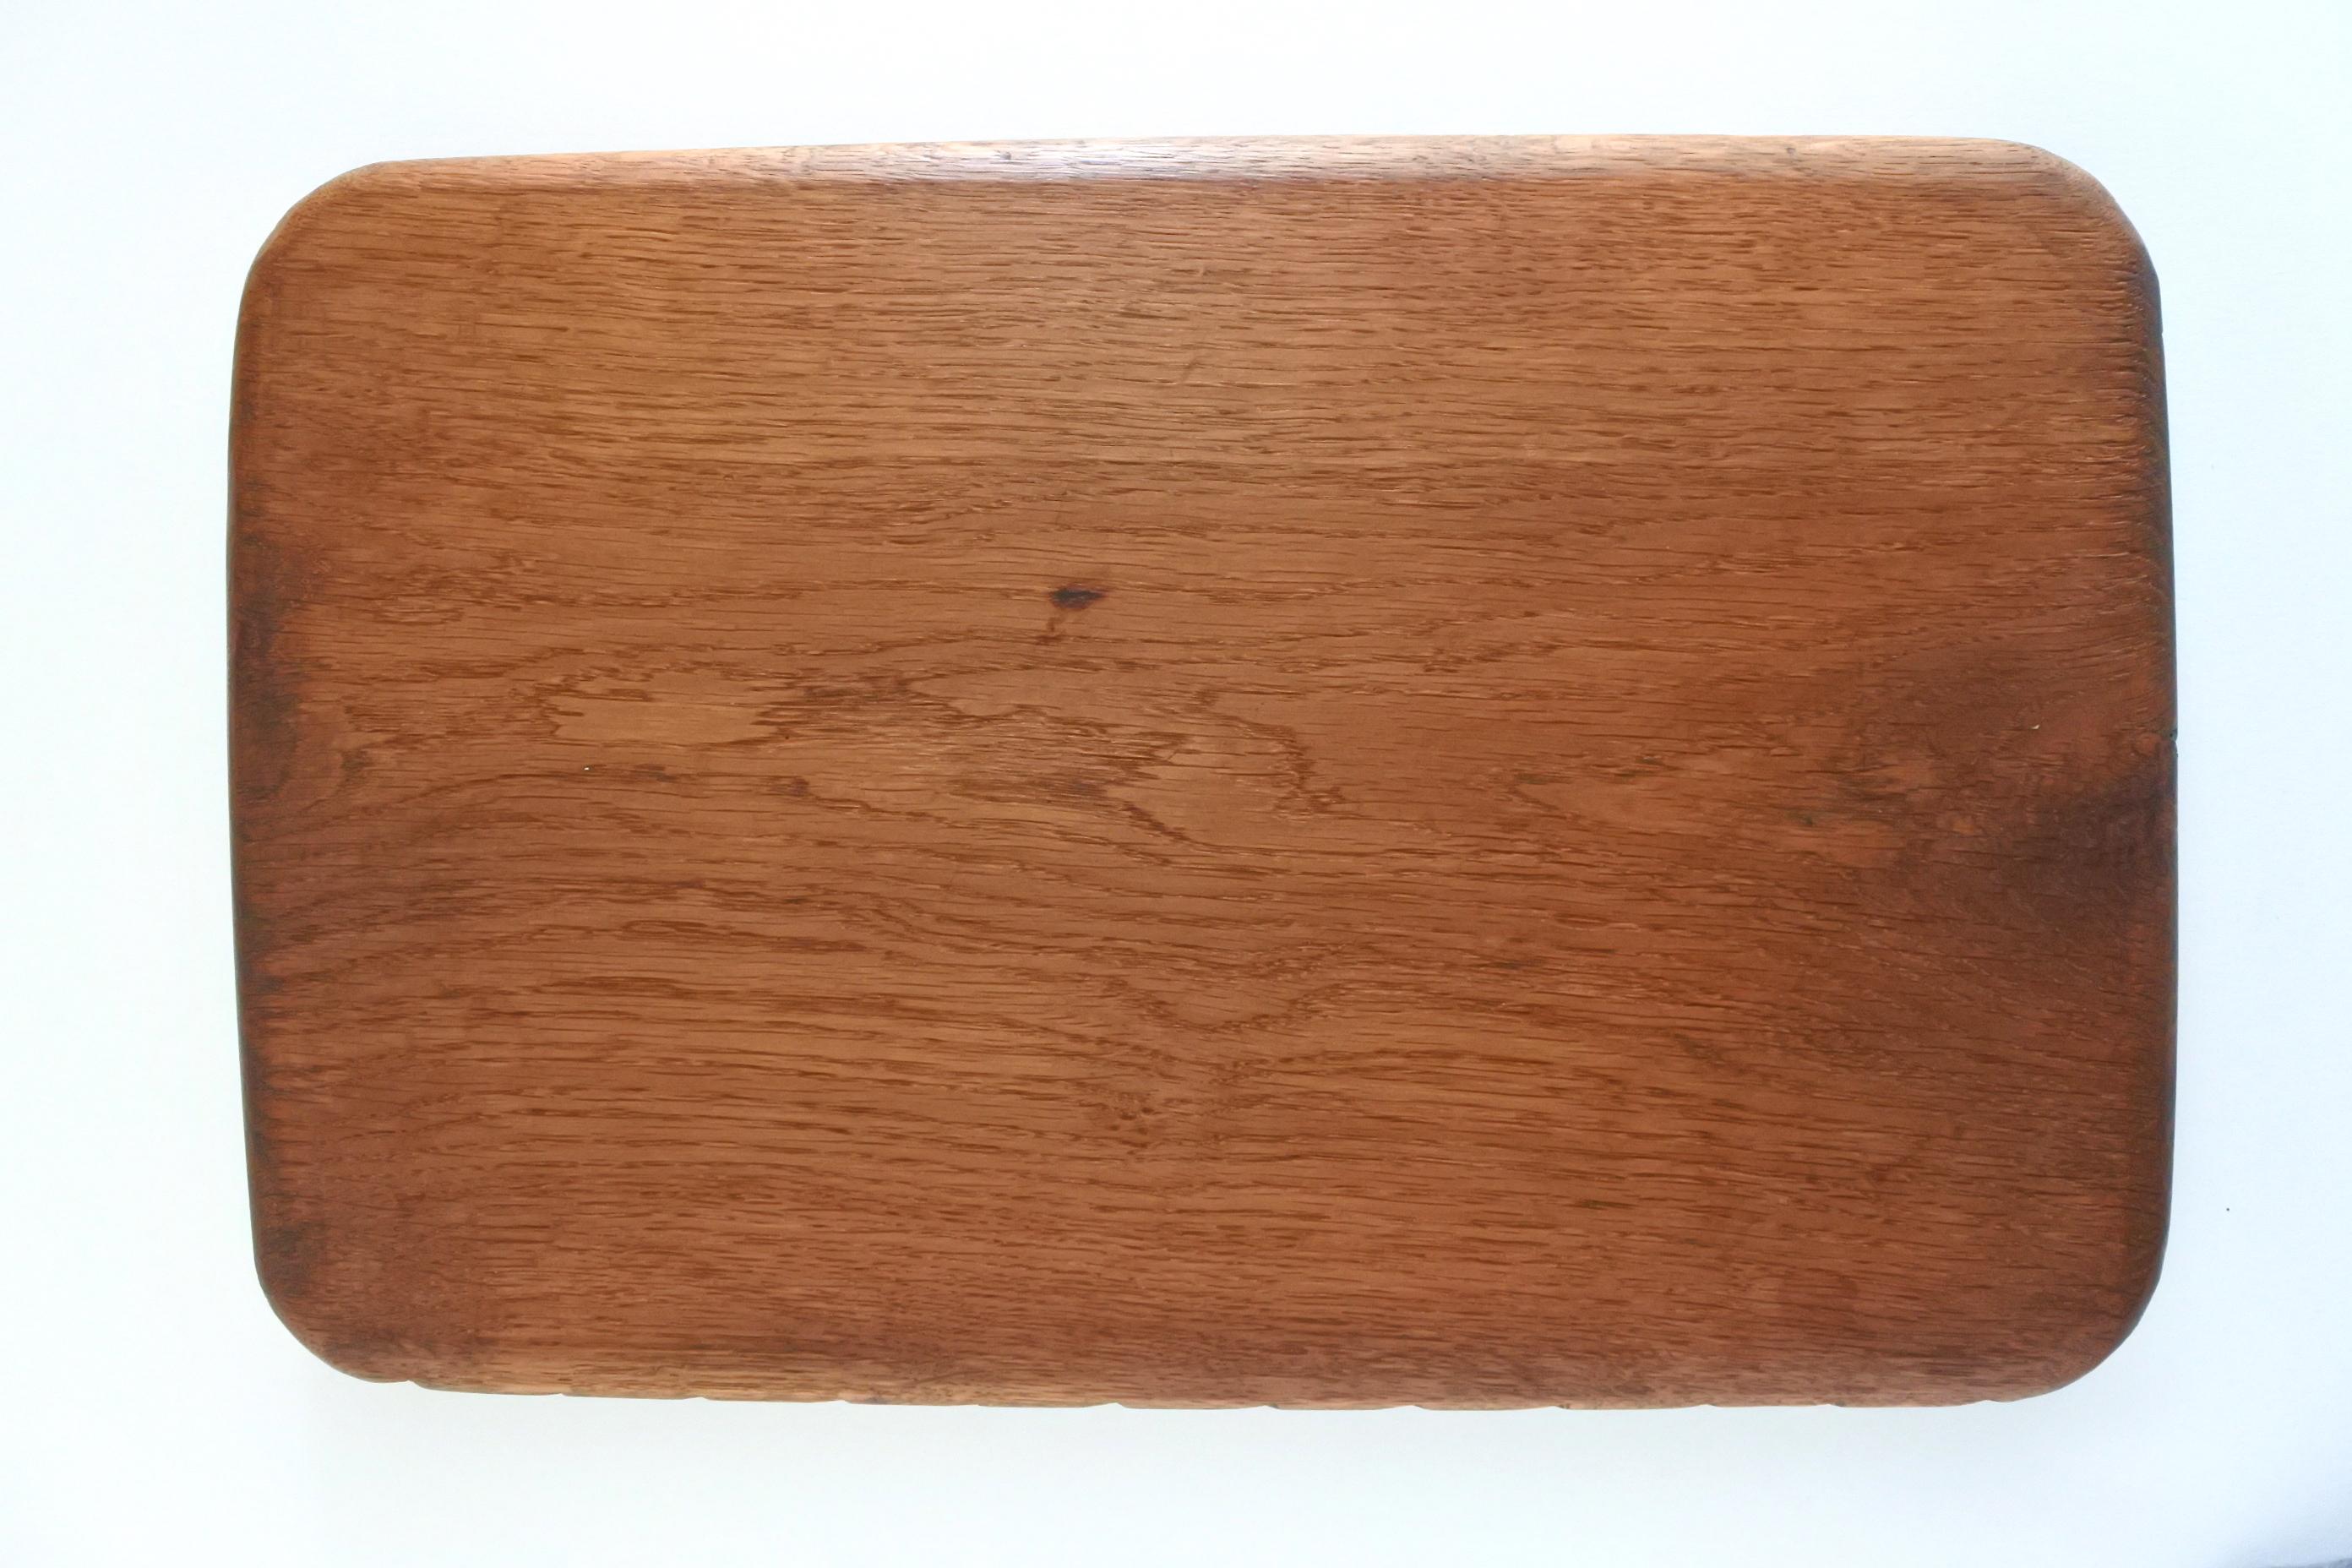 French handmade solid oakwood decorative platter or serving tray,
circa 1950.
 